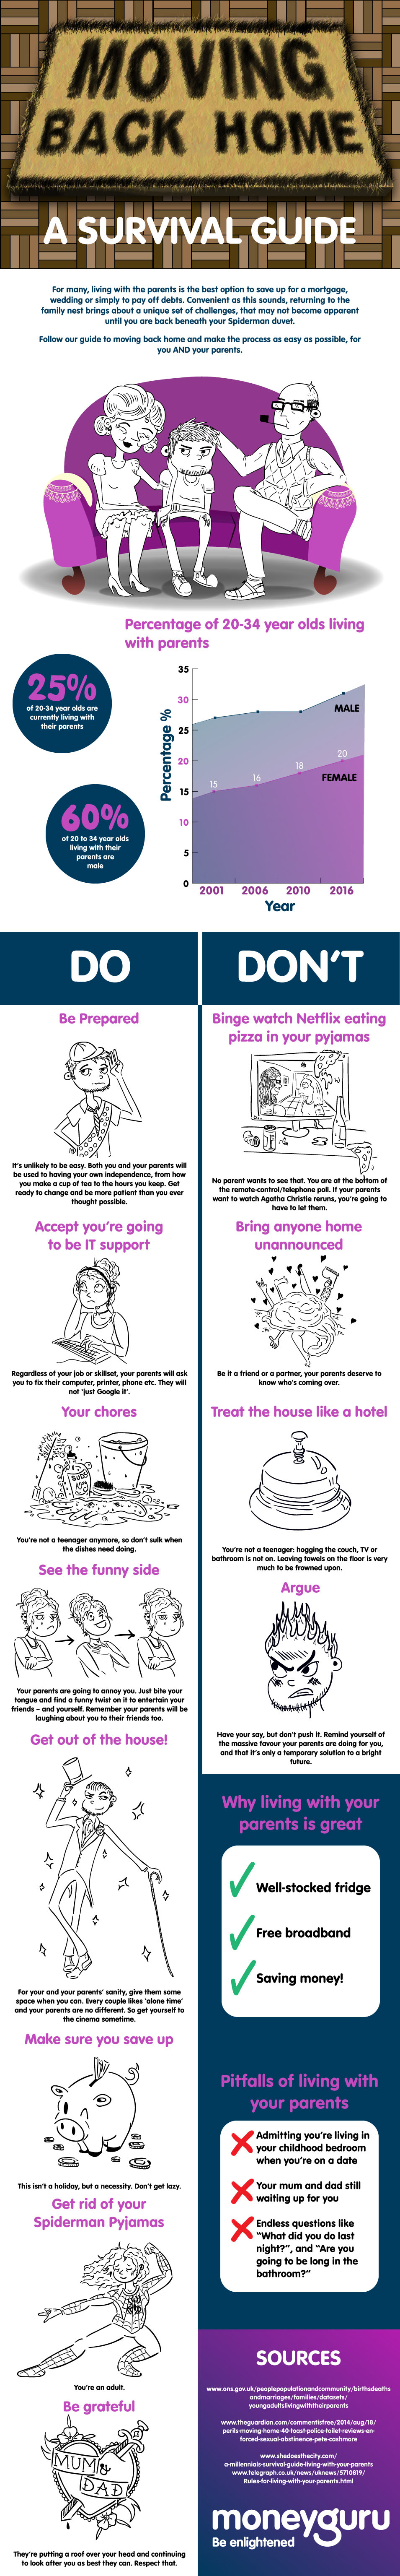 Moving Back Home: A Survival Guide